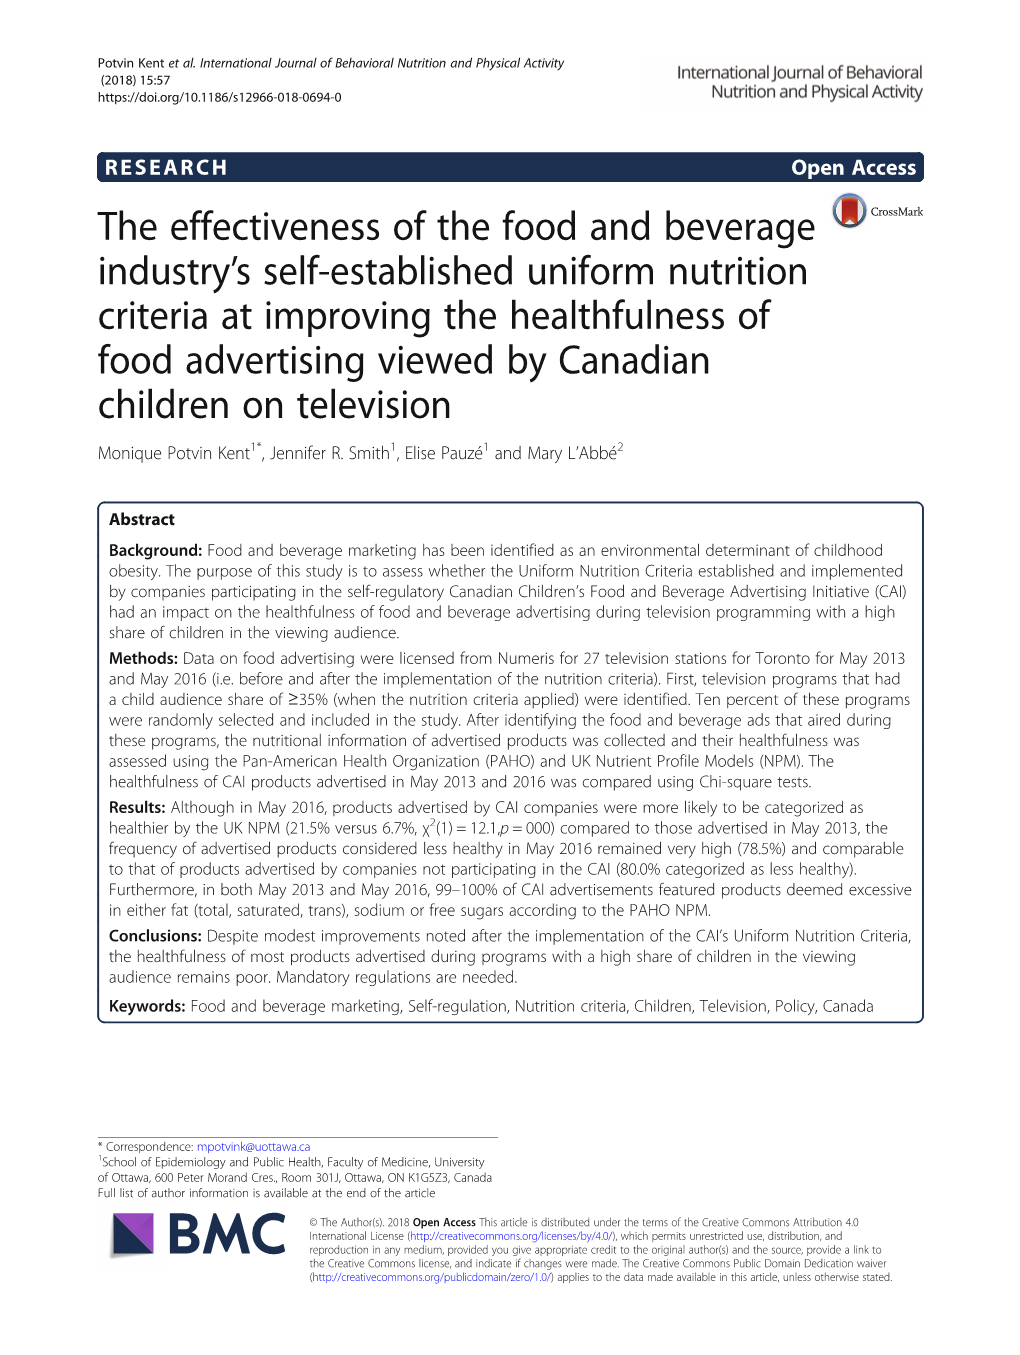 The Effectiveness of the Food and Beverage Industry's Self-Established